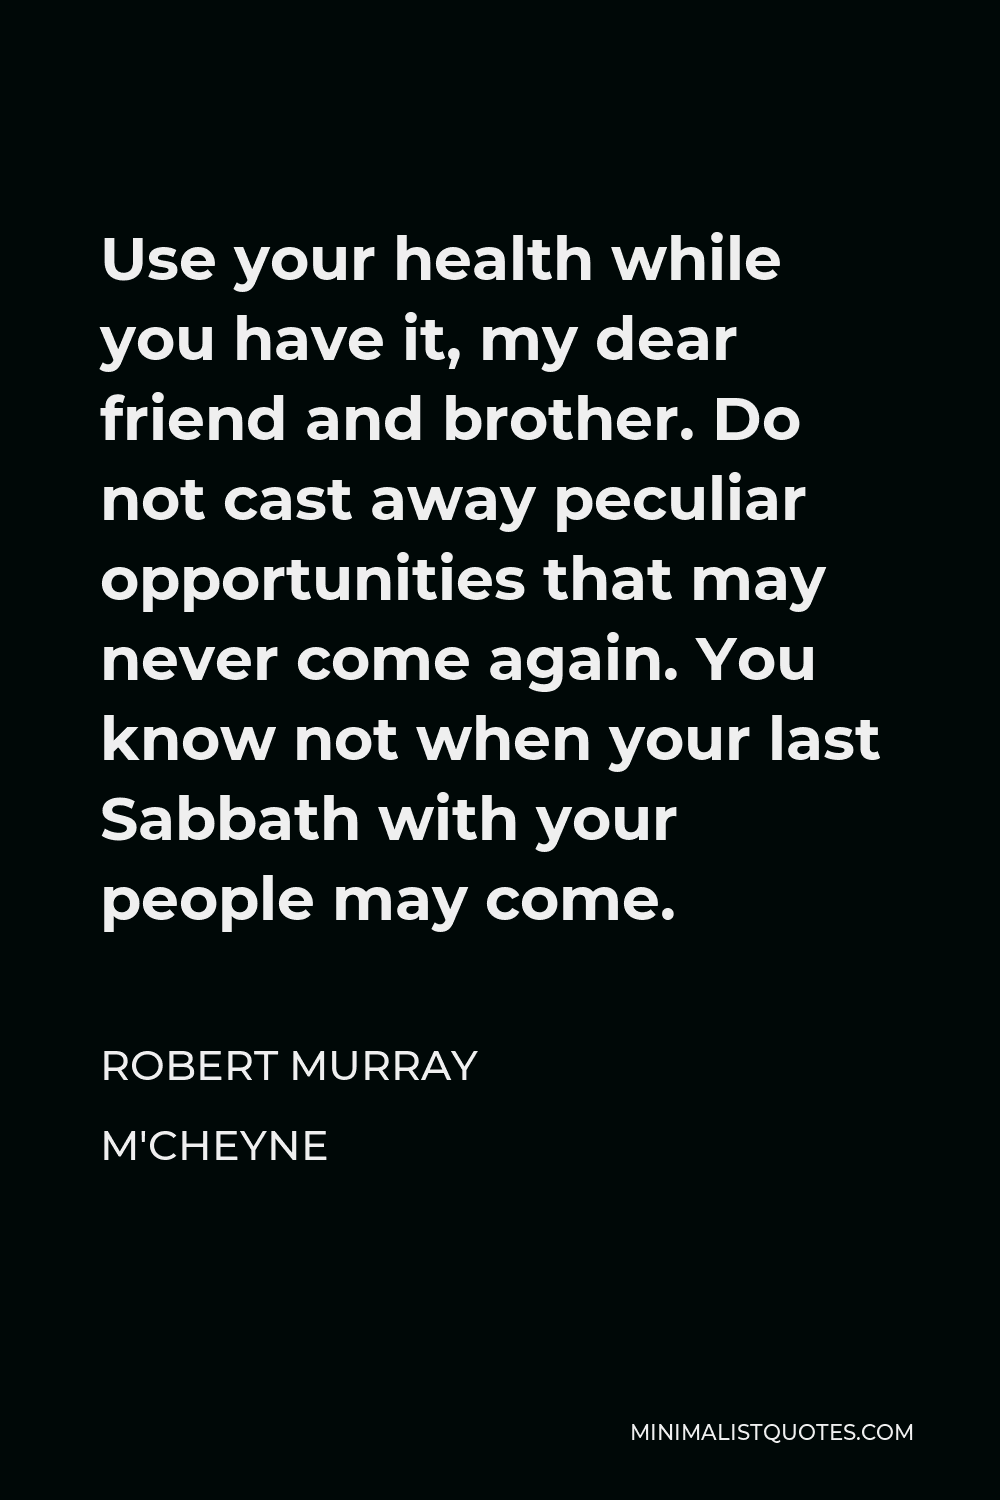 Robert Murray M'Cheyne Quote - Use your health while you have it, my dear friend and brother. Do not cast away peculiar opportunities that may never come again. You know not when your last Sabbath with your people may come.